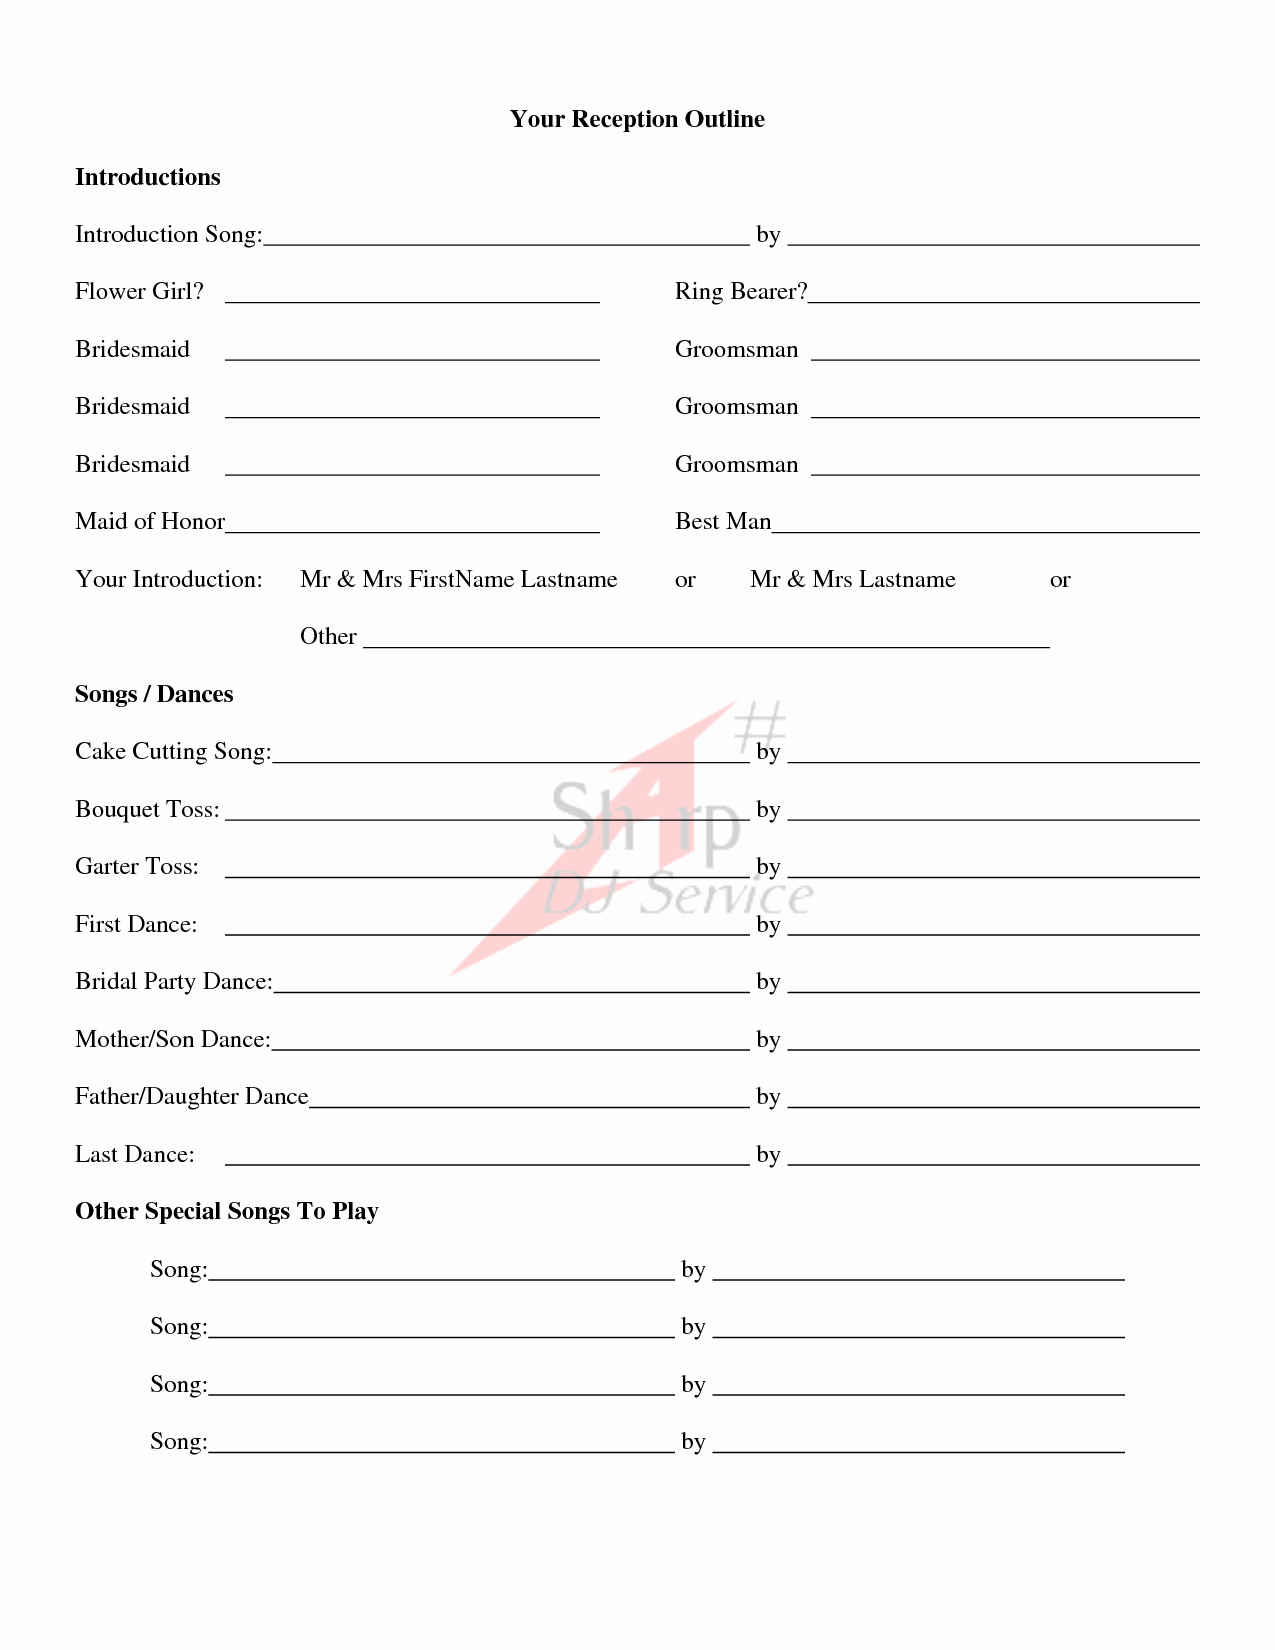 Wedding Music List Template Beautiful Wedding Ceremony Outline Examples